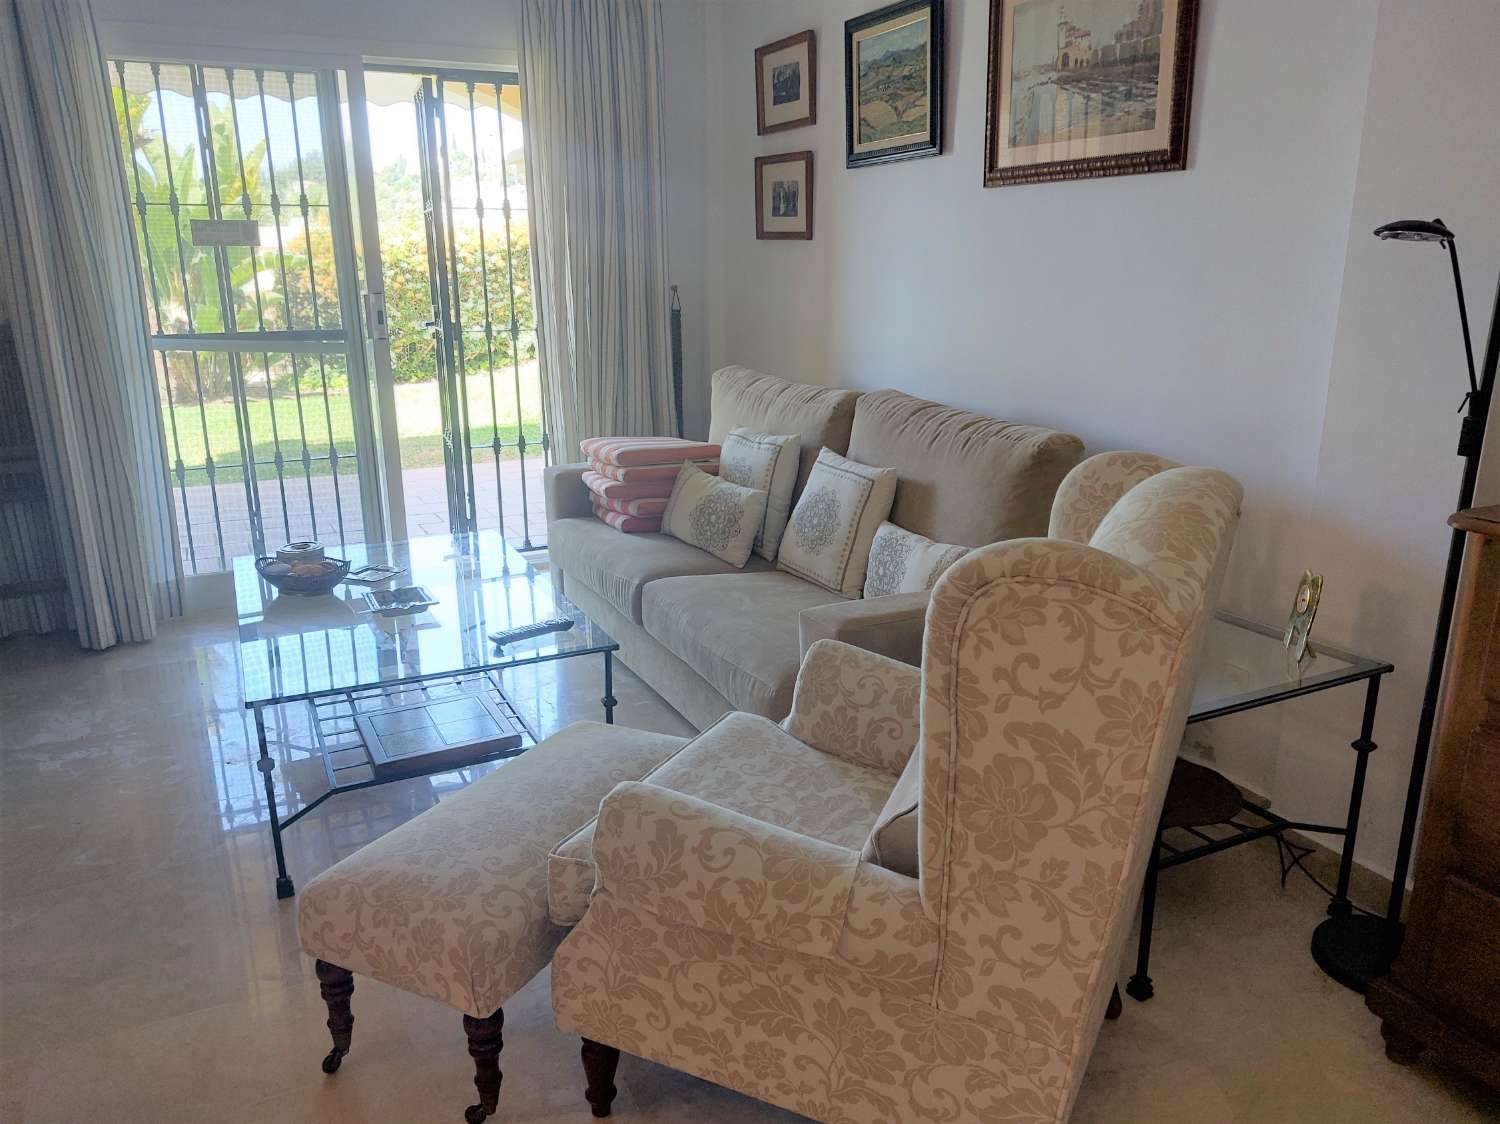 Wonderfull garden apartment in a peaceful and upscale gated community in La Quinta.